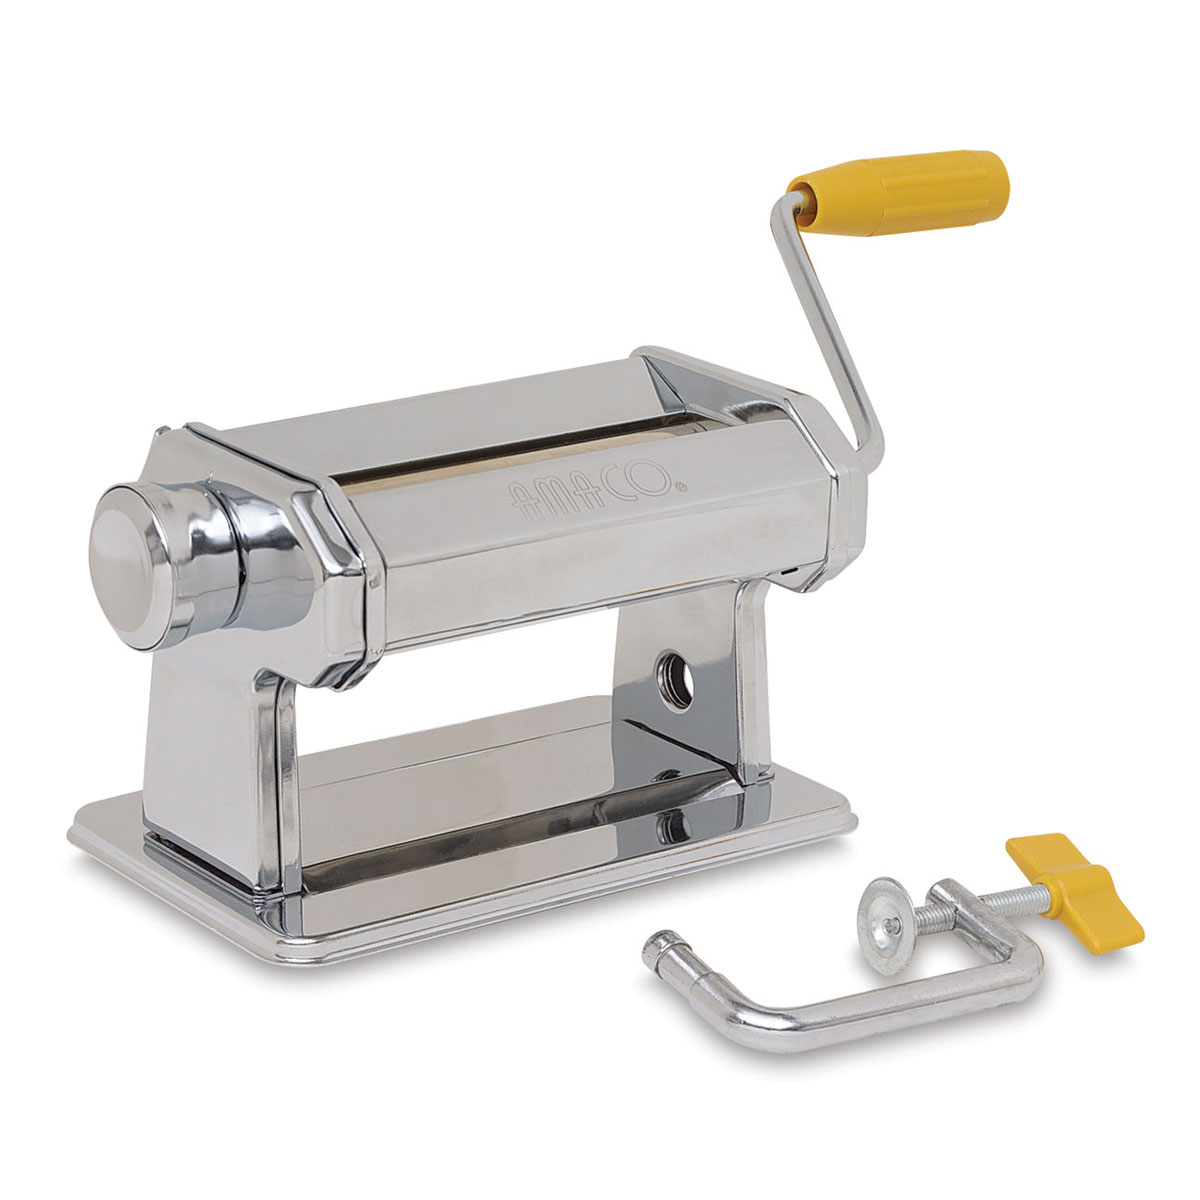  Amaco Metal Pasta Machine for Polymer Clay